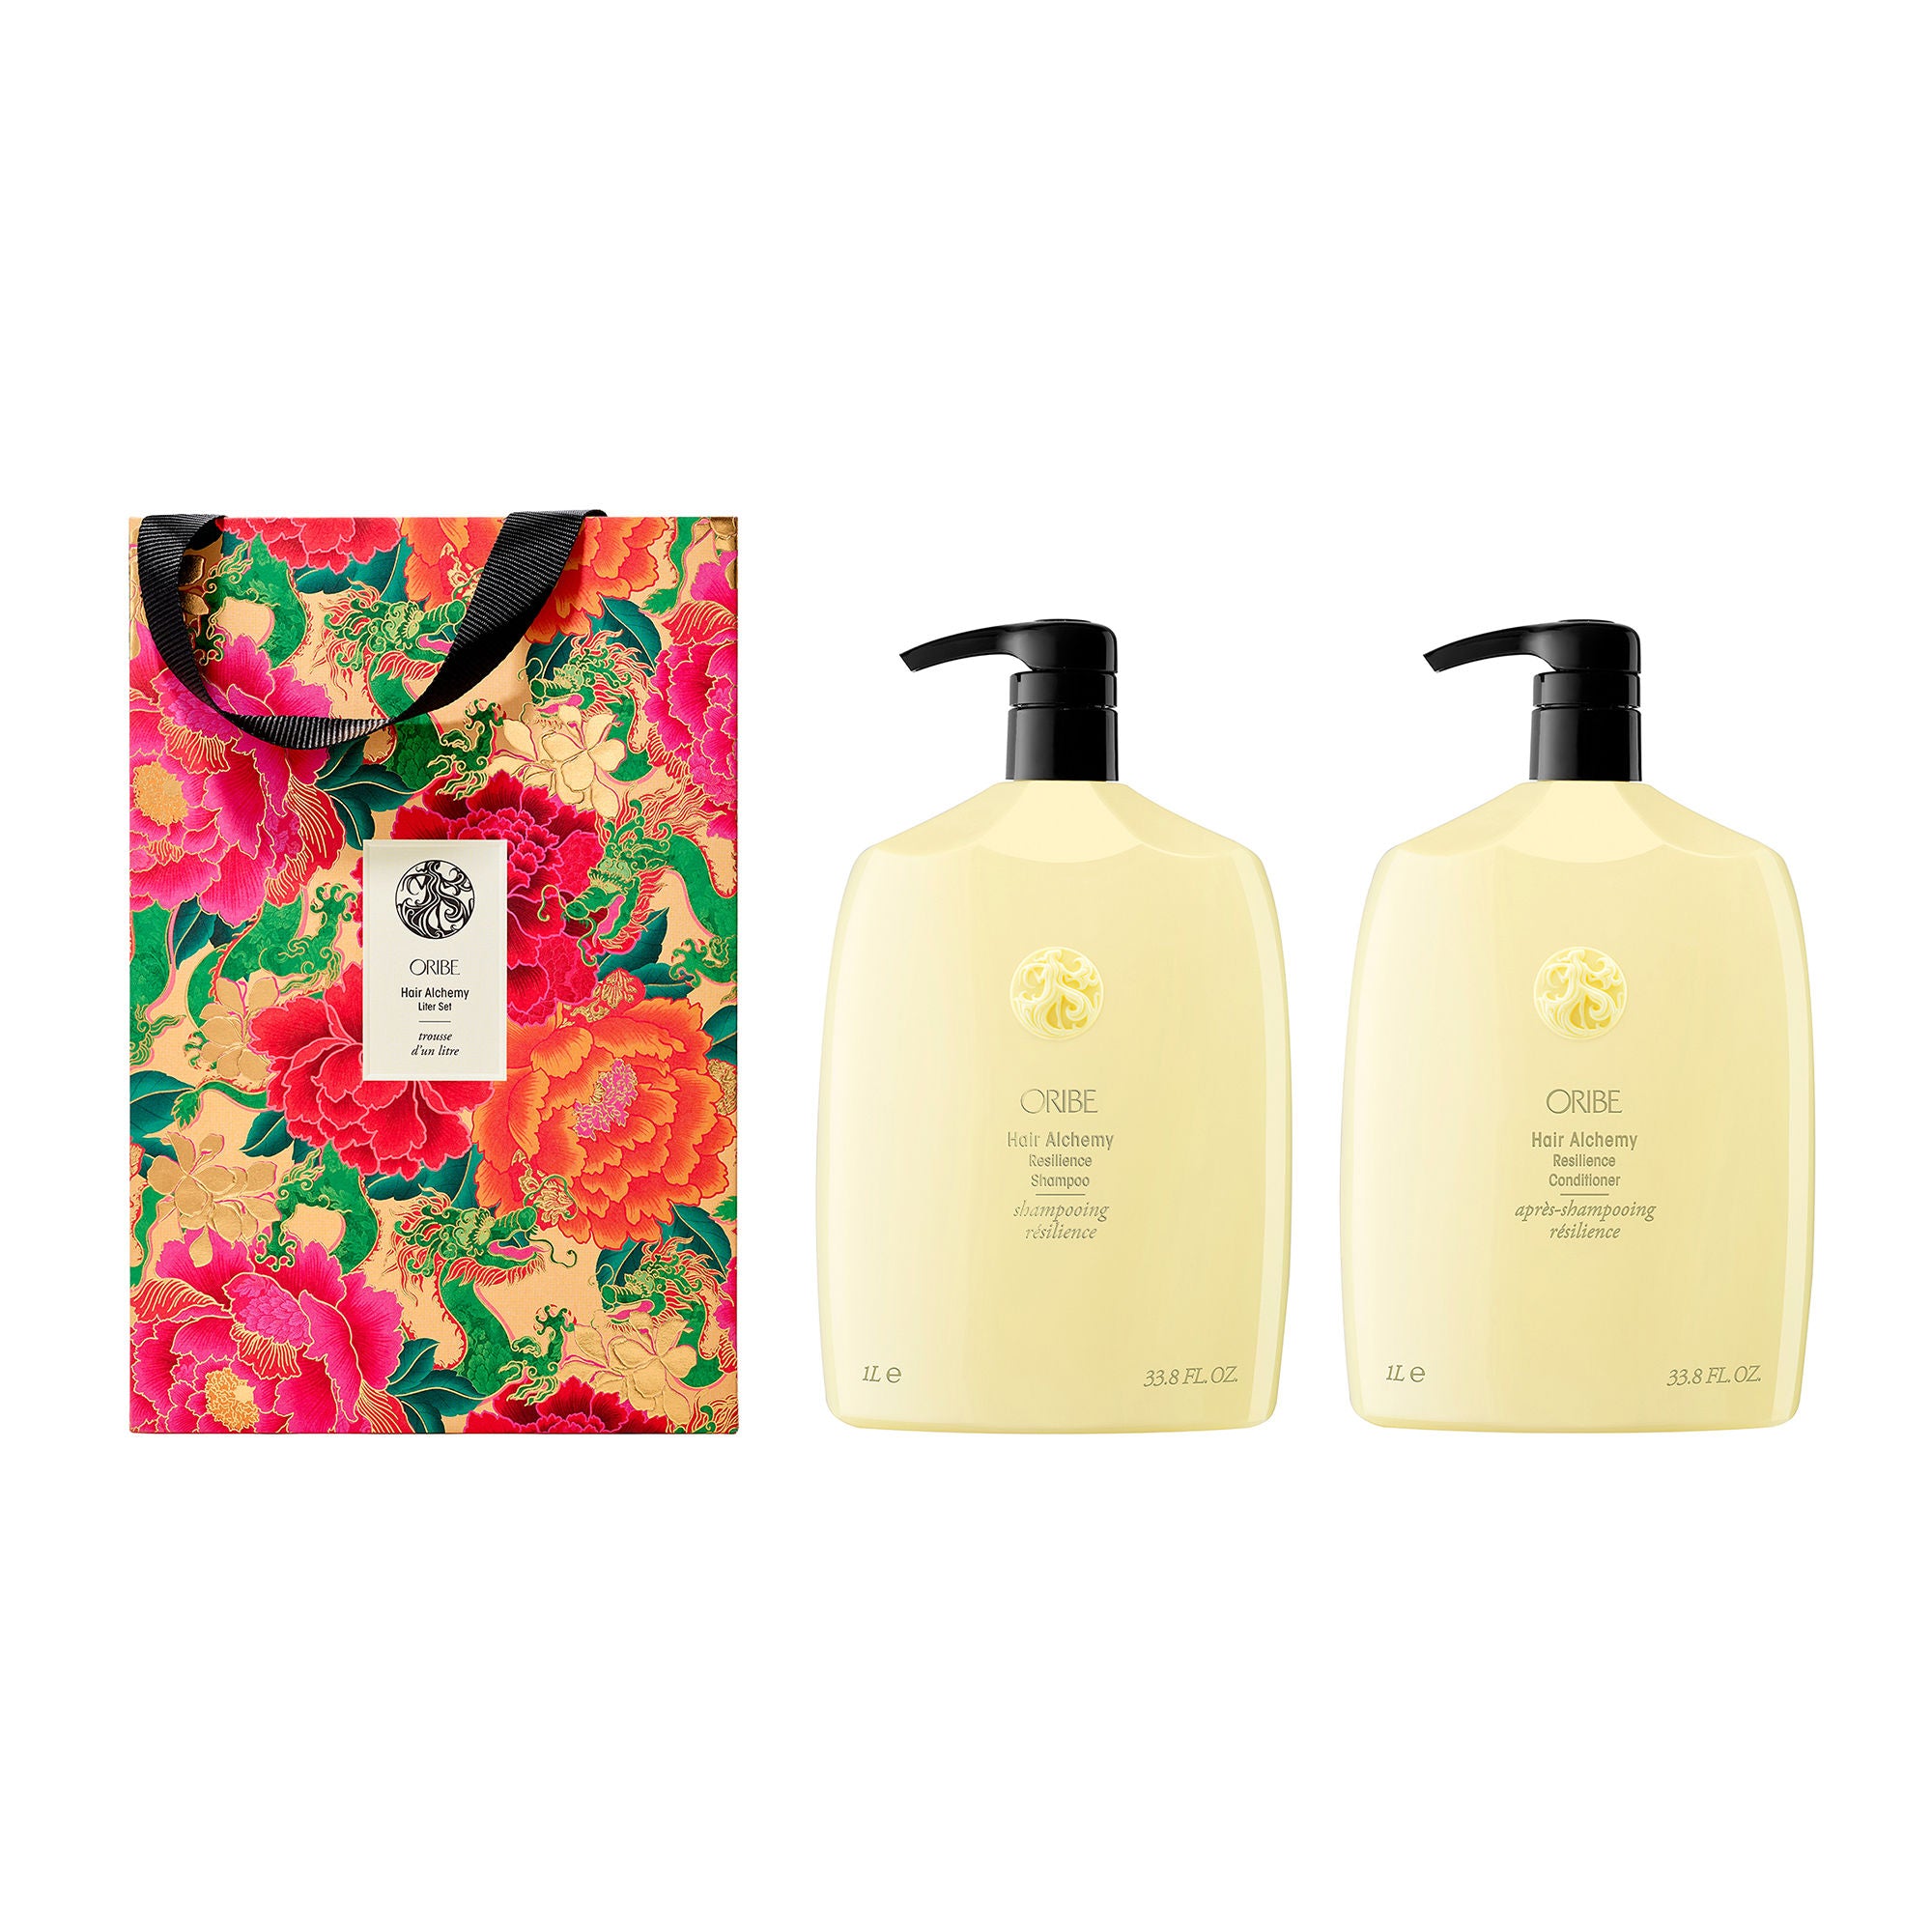 Oribe Lunar New Year Hair Alchemy Strengthening Shampoo and Conditioner Liter Set (Limited Edition) main image